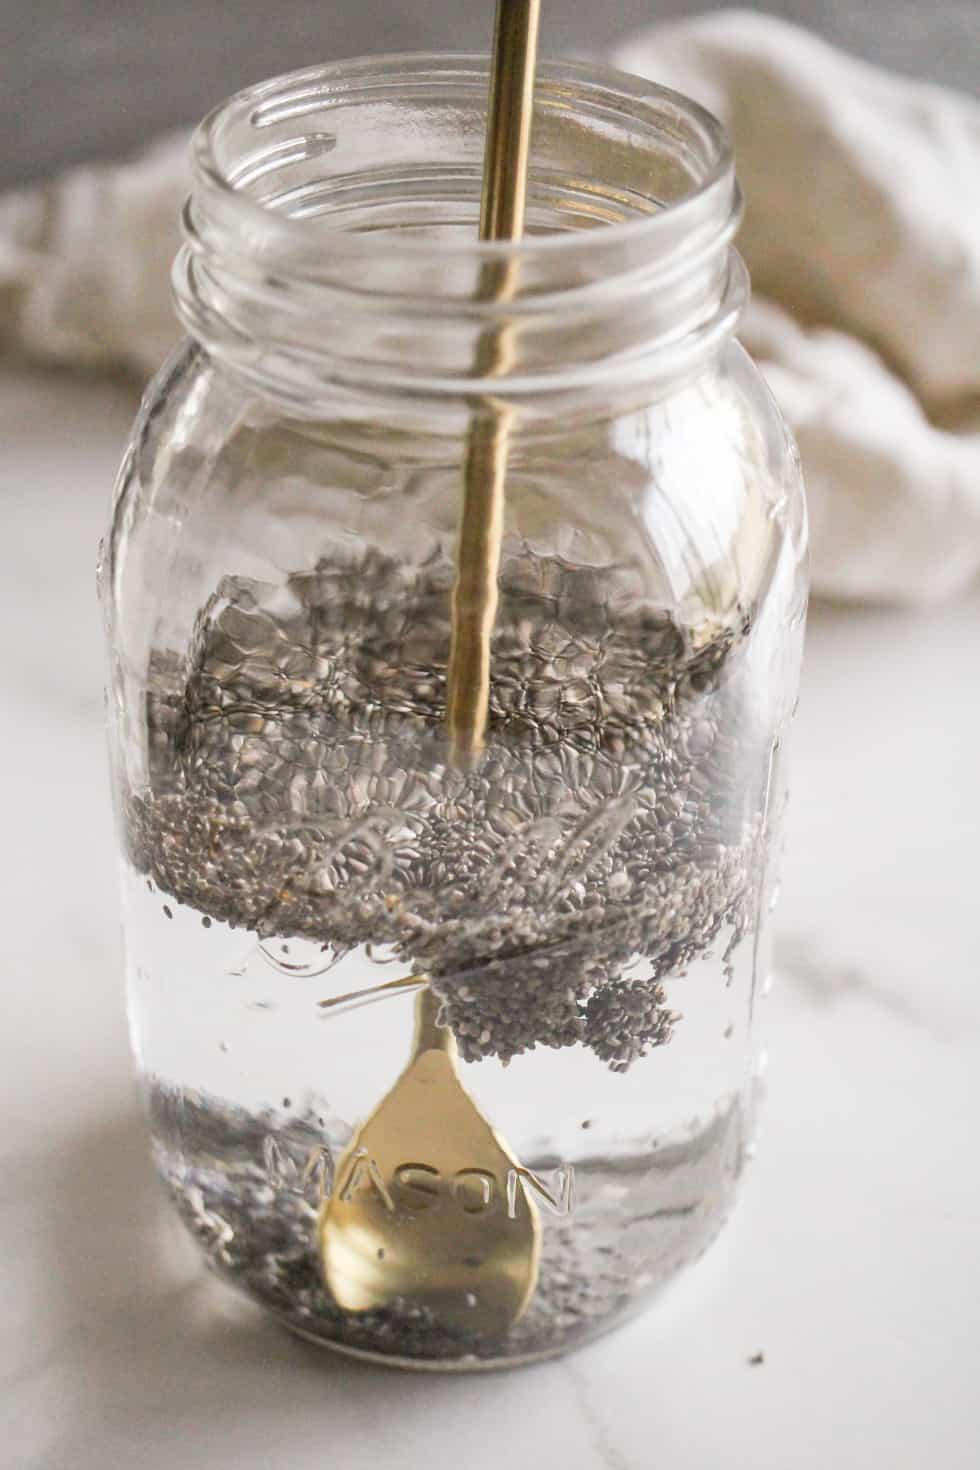 Chia seeds in a jar of water being stirred with a gold spoon.